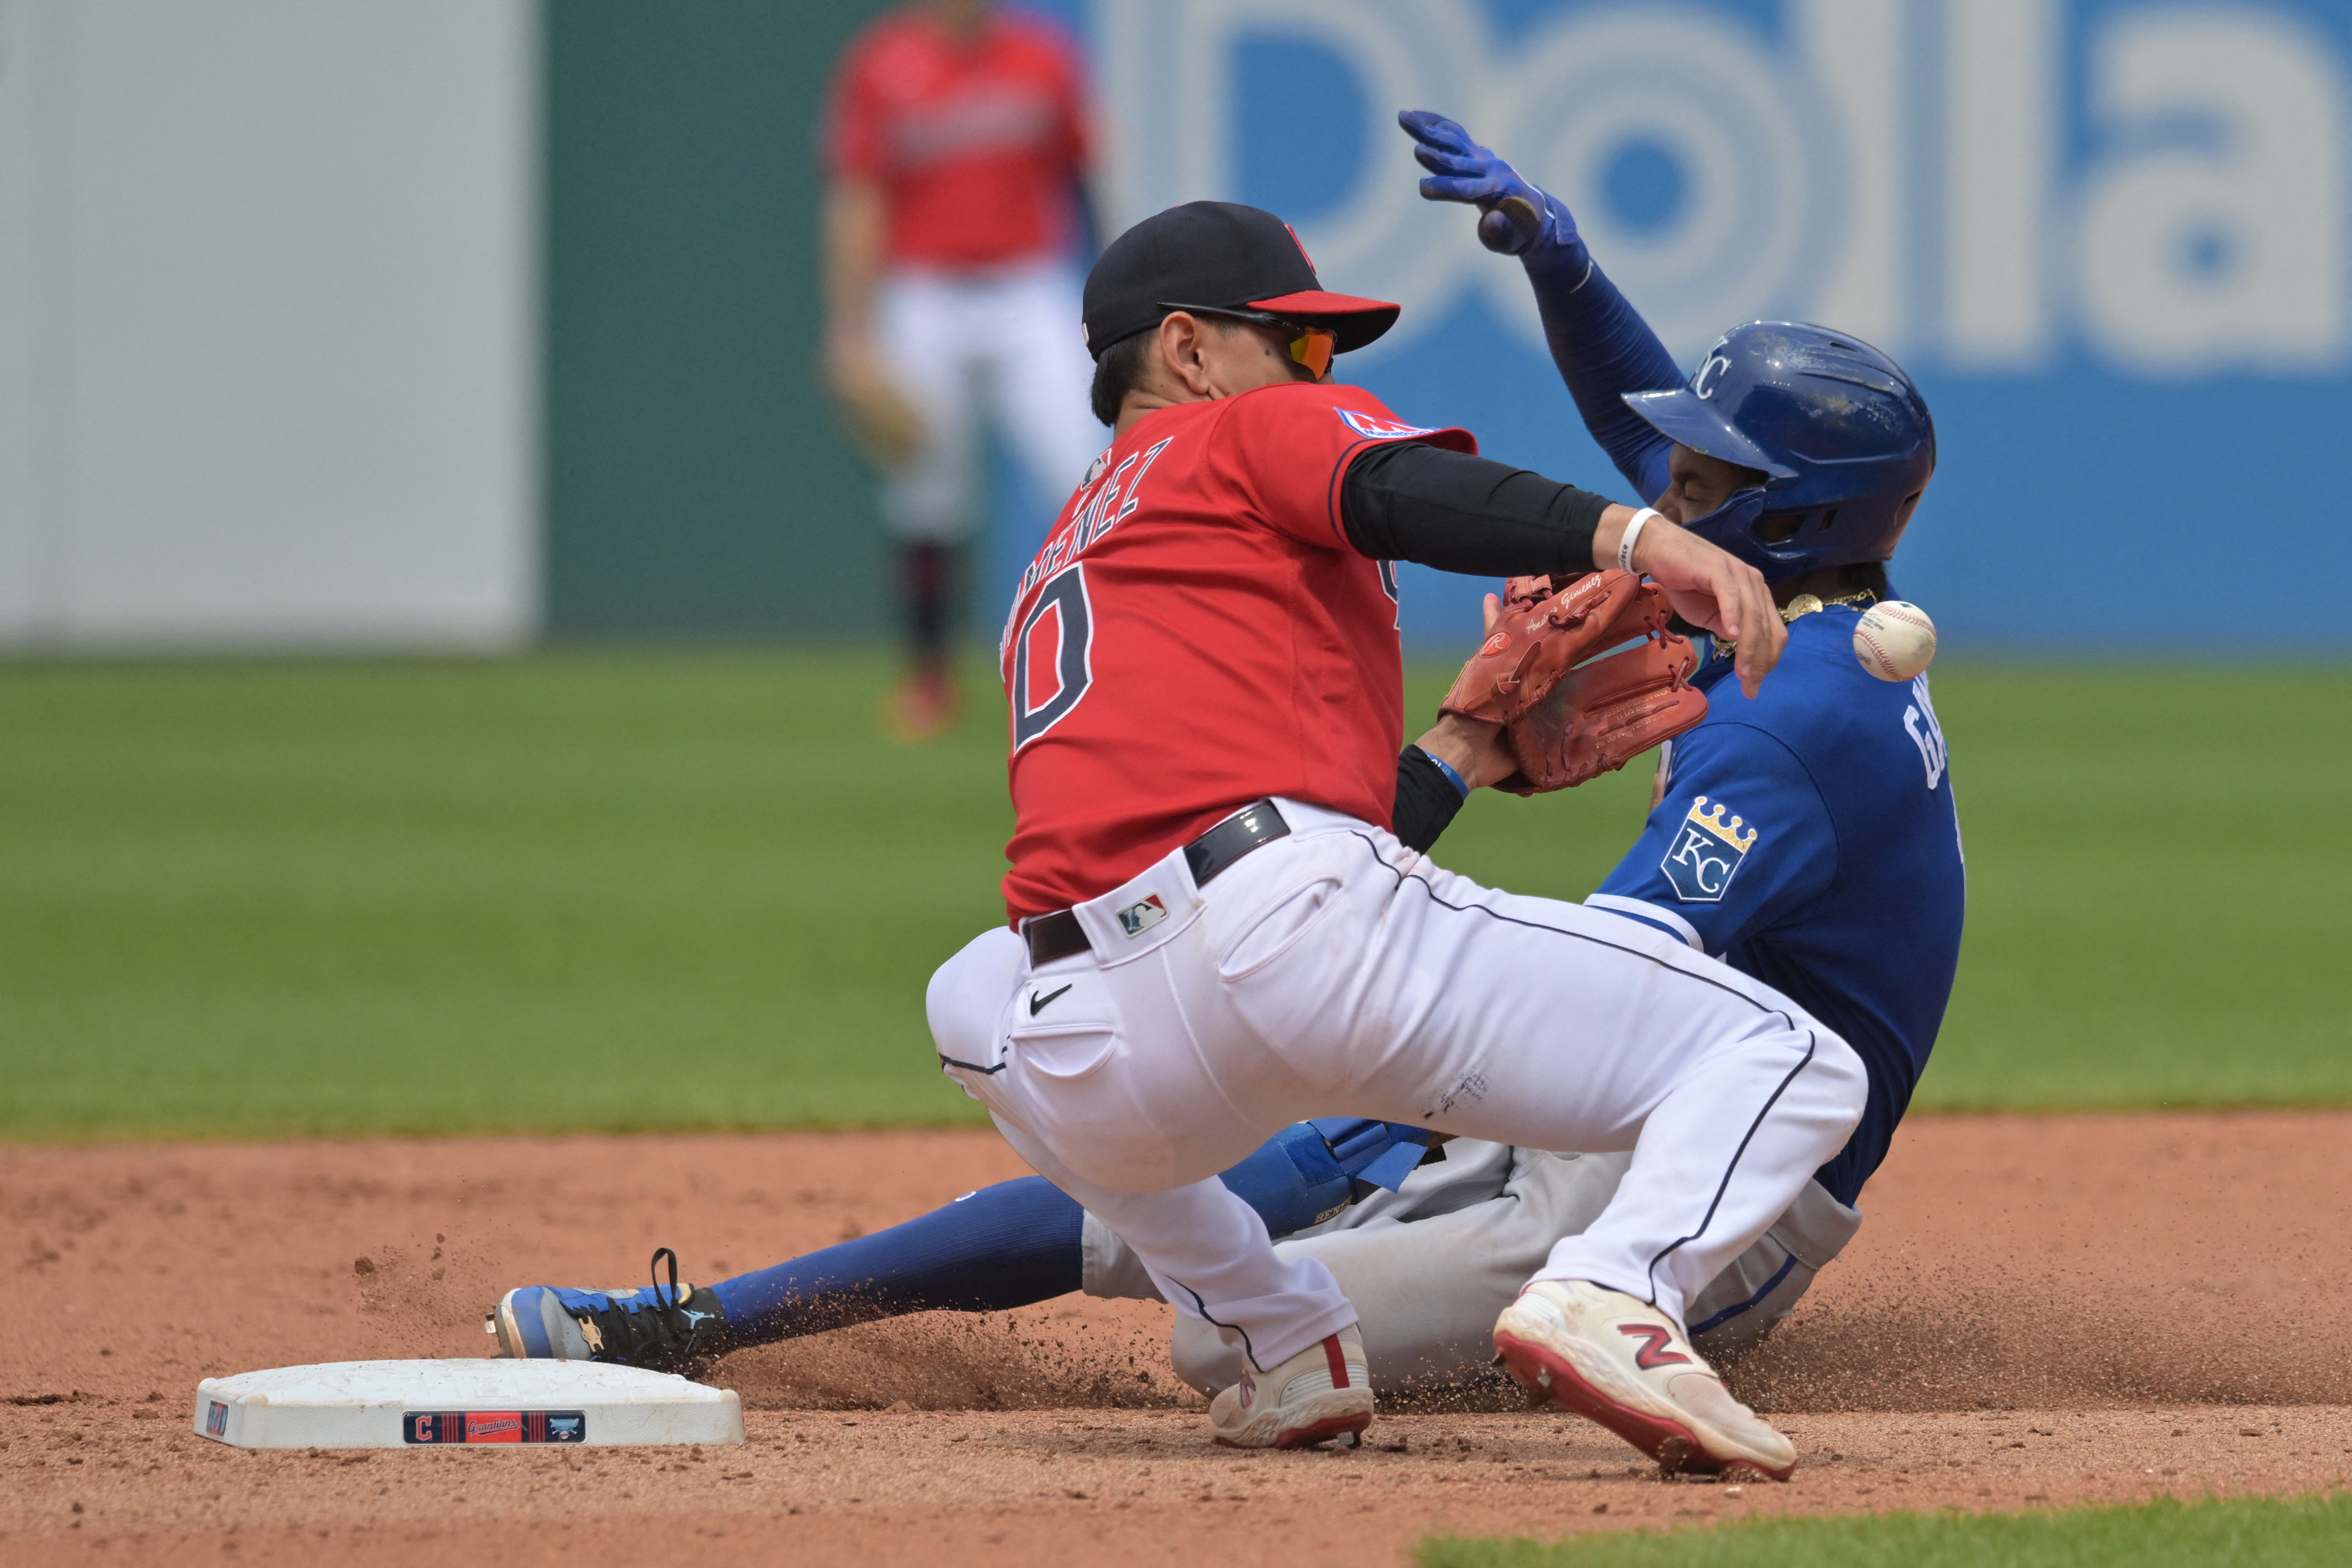 Photo: Royals Kyle Isbel Dives Toward Home Plate on Opening Day